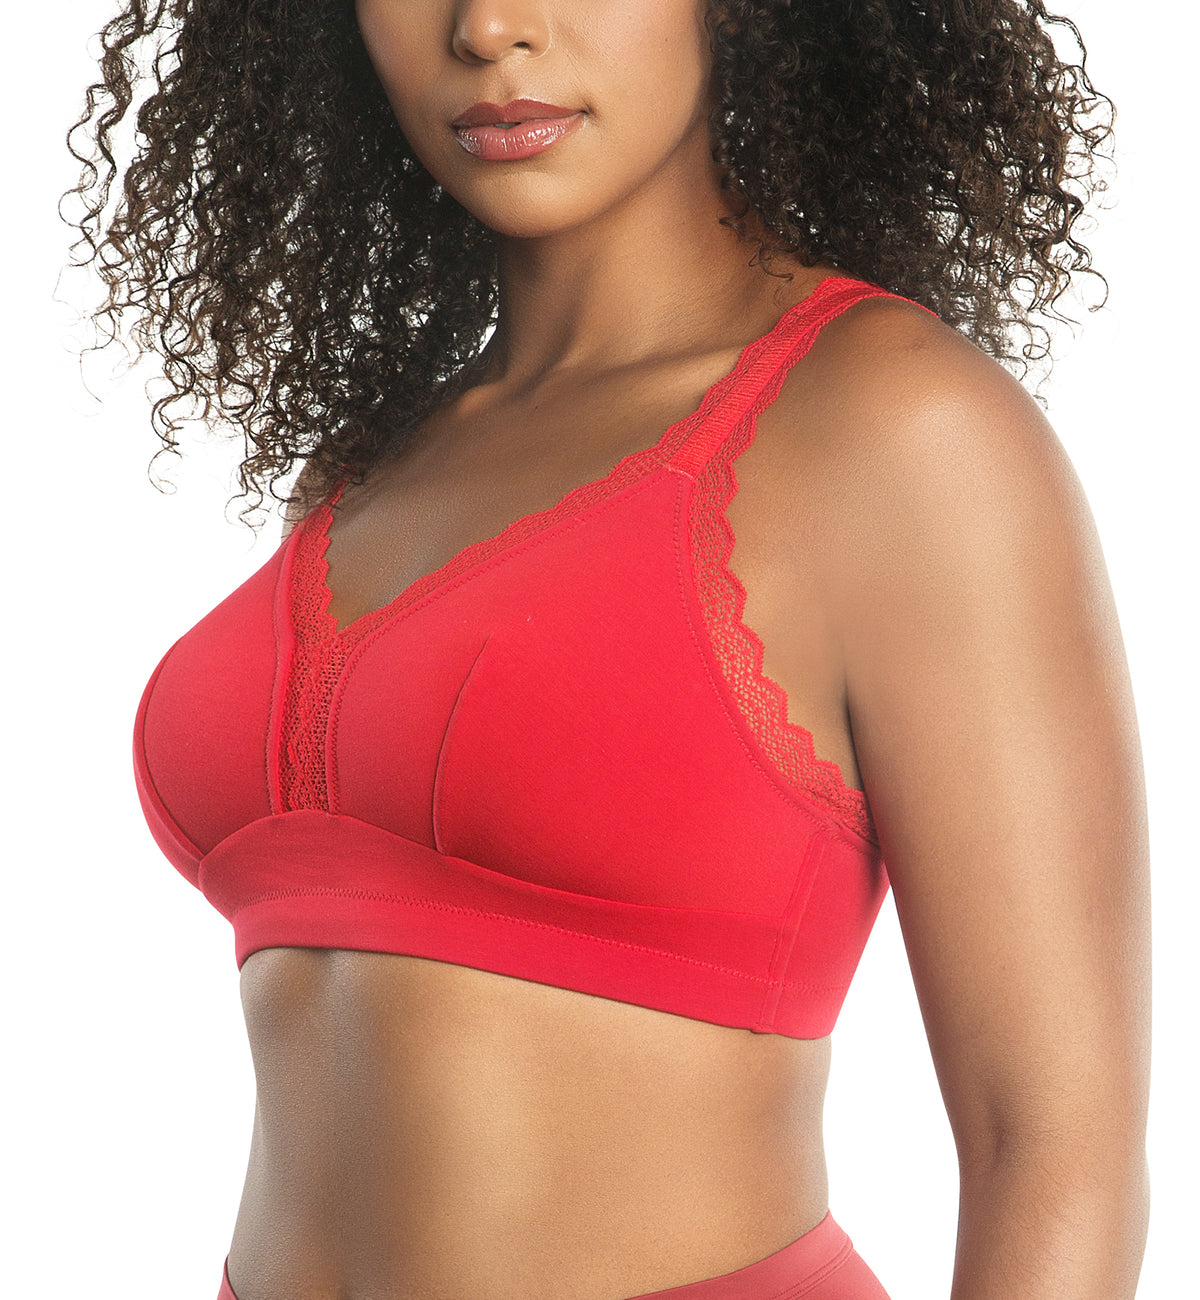 Parfait Dalis Soft Modal Bralette with J-Hook (5641),30D,Racing Red - Racing Red,30D